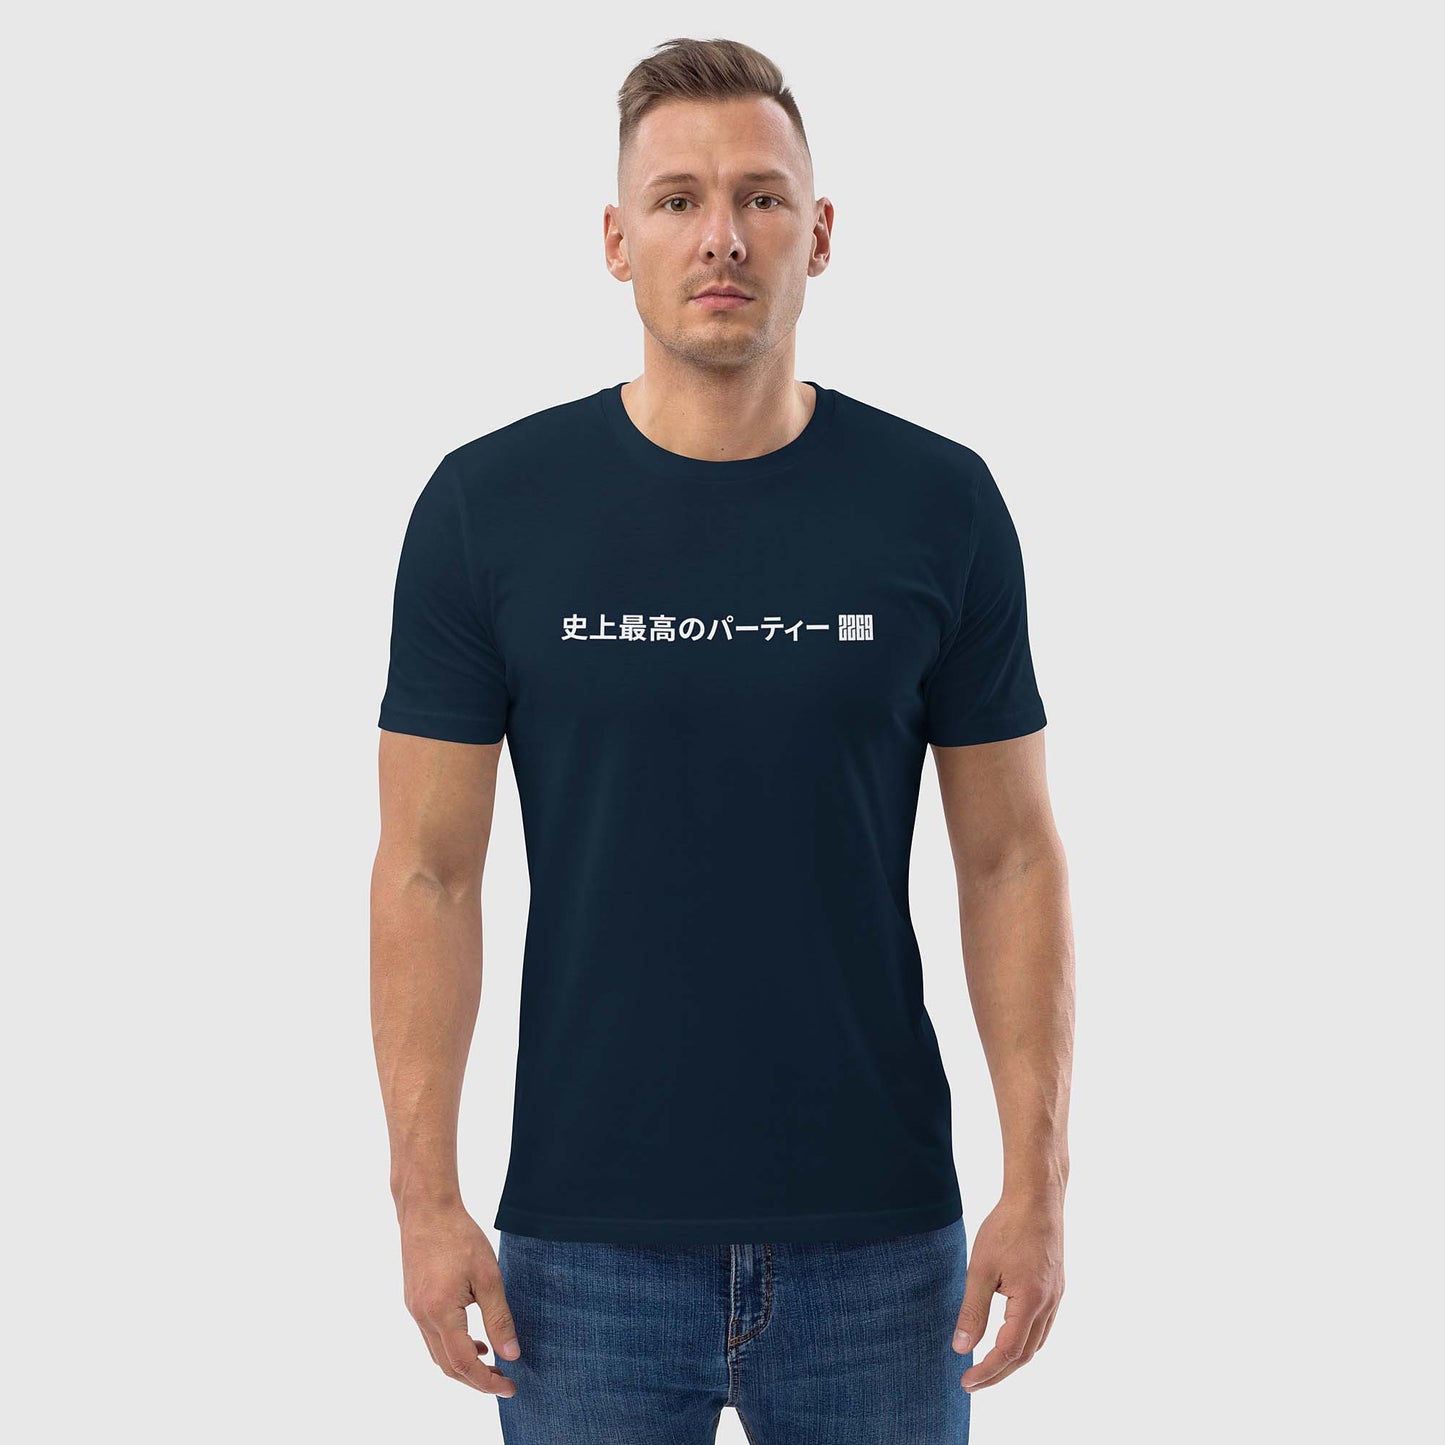 Men's navy organic cotton t-shirt with Japanese 2269 party message